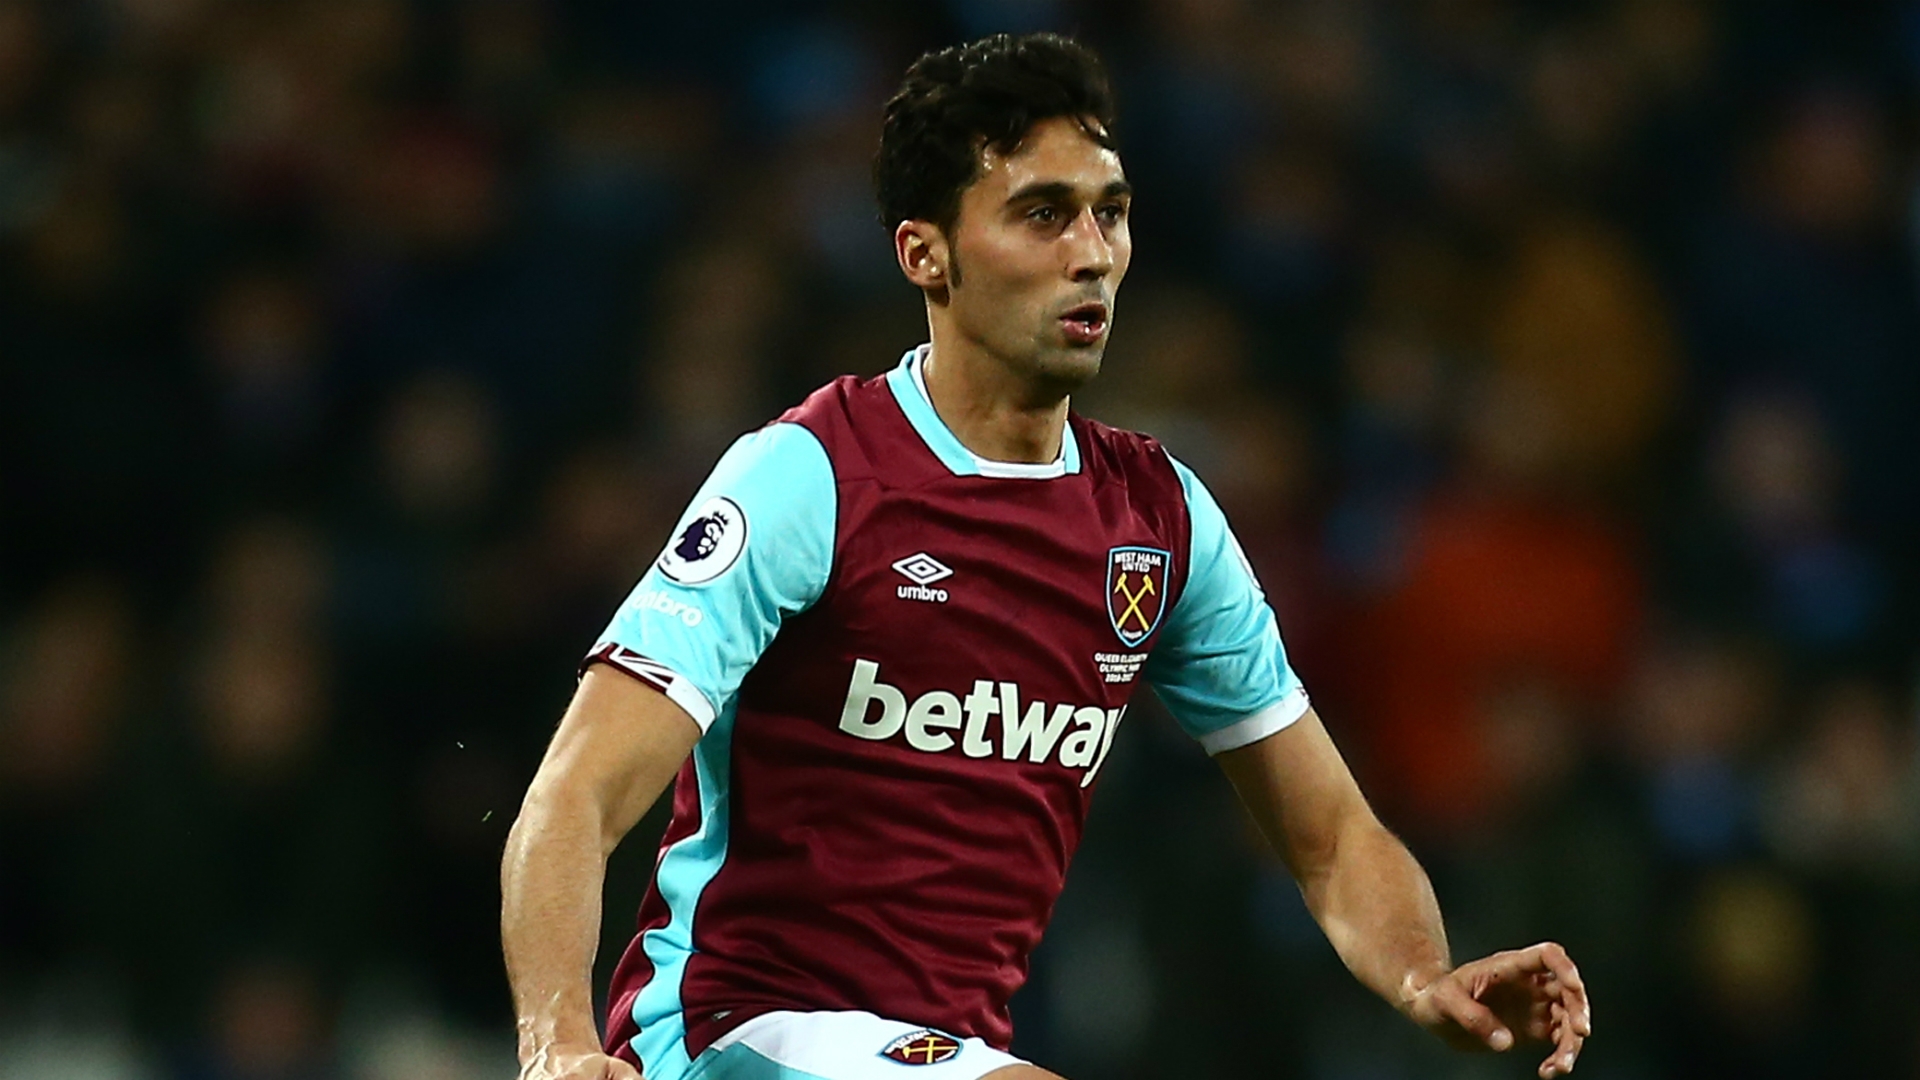 Arbeloa moved back to the Premier League in 2016 with hopes of reviving his career. Arbeloa signed for West Ham United.